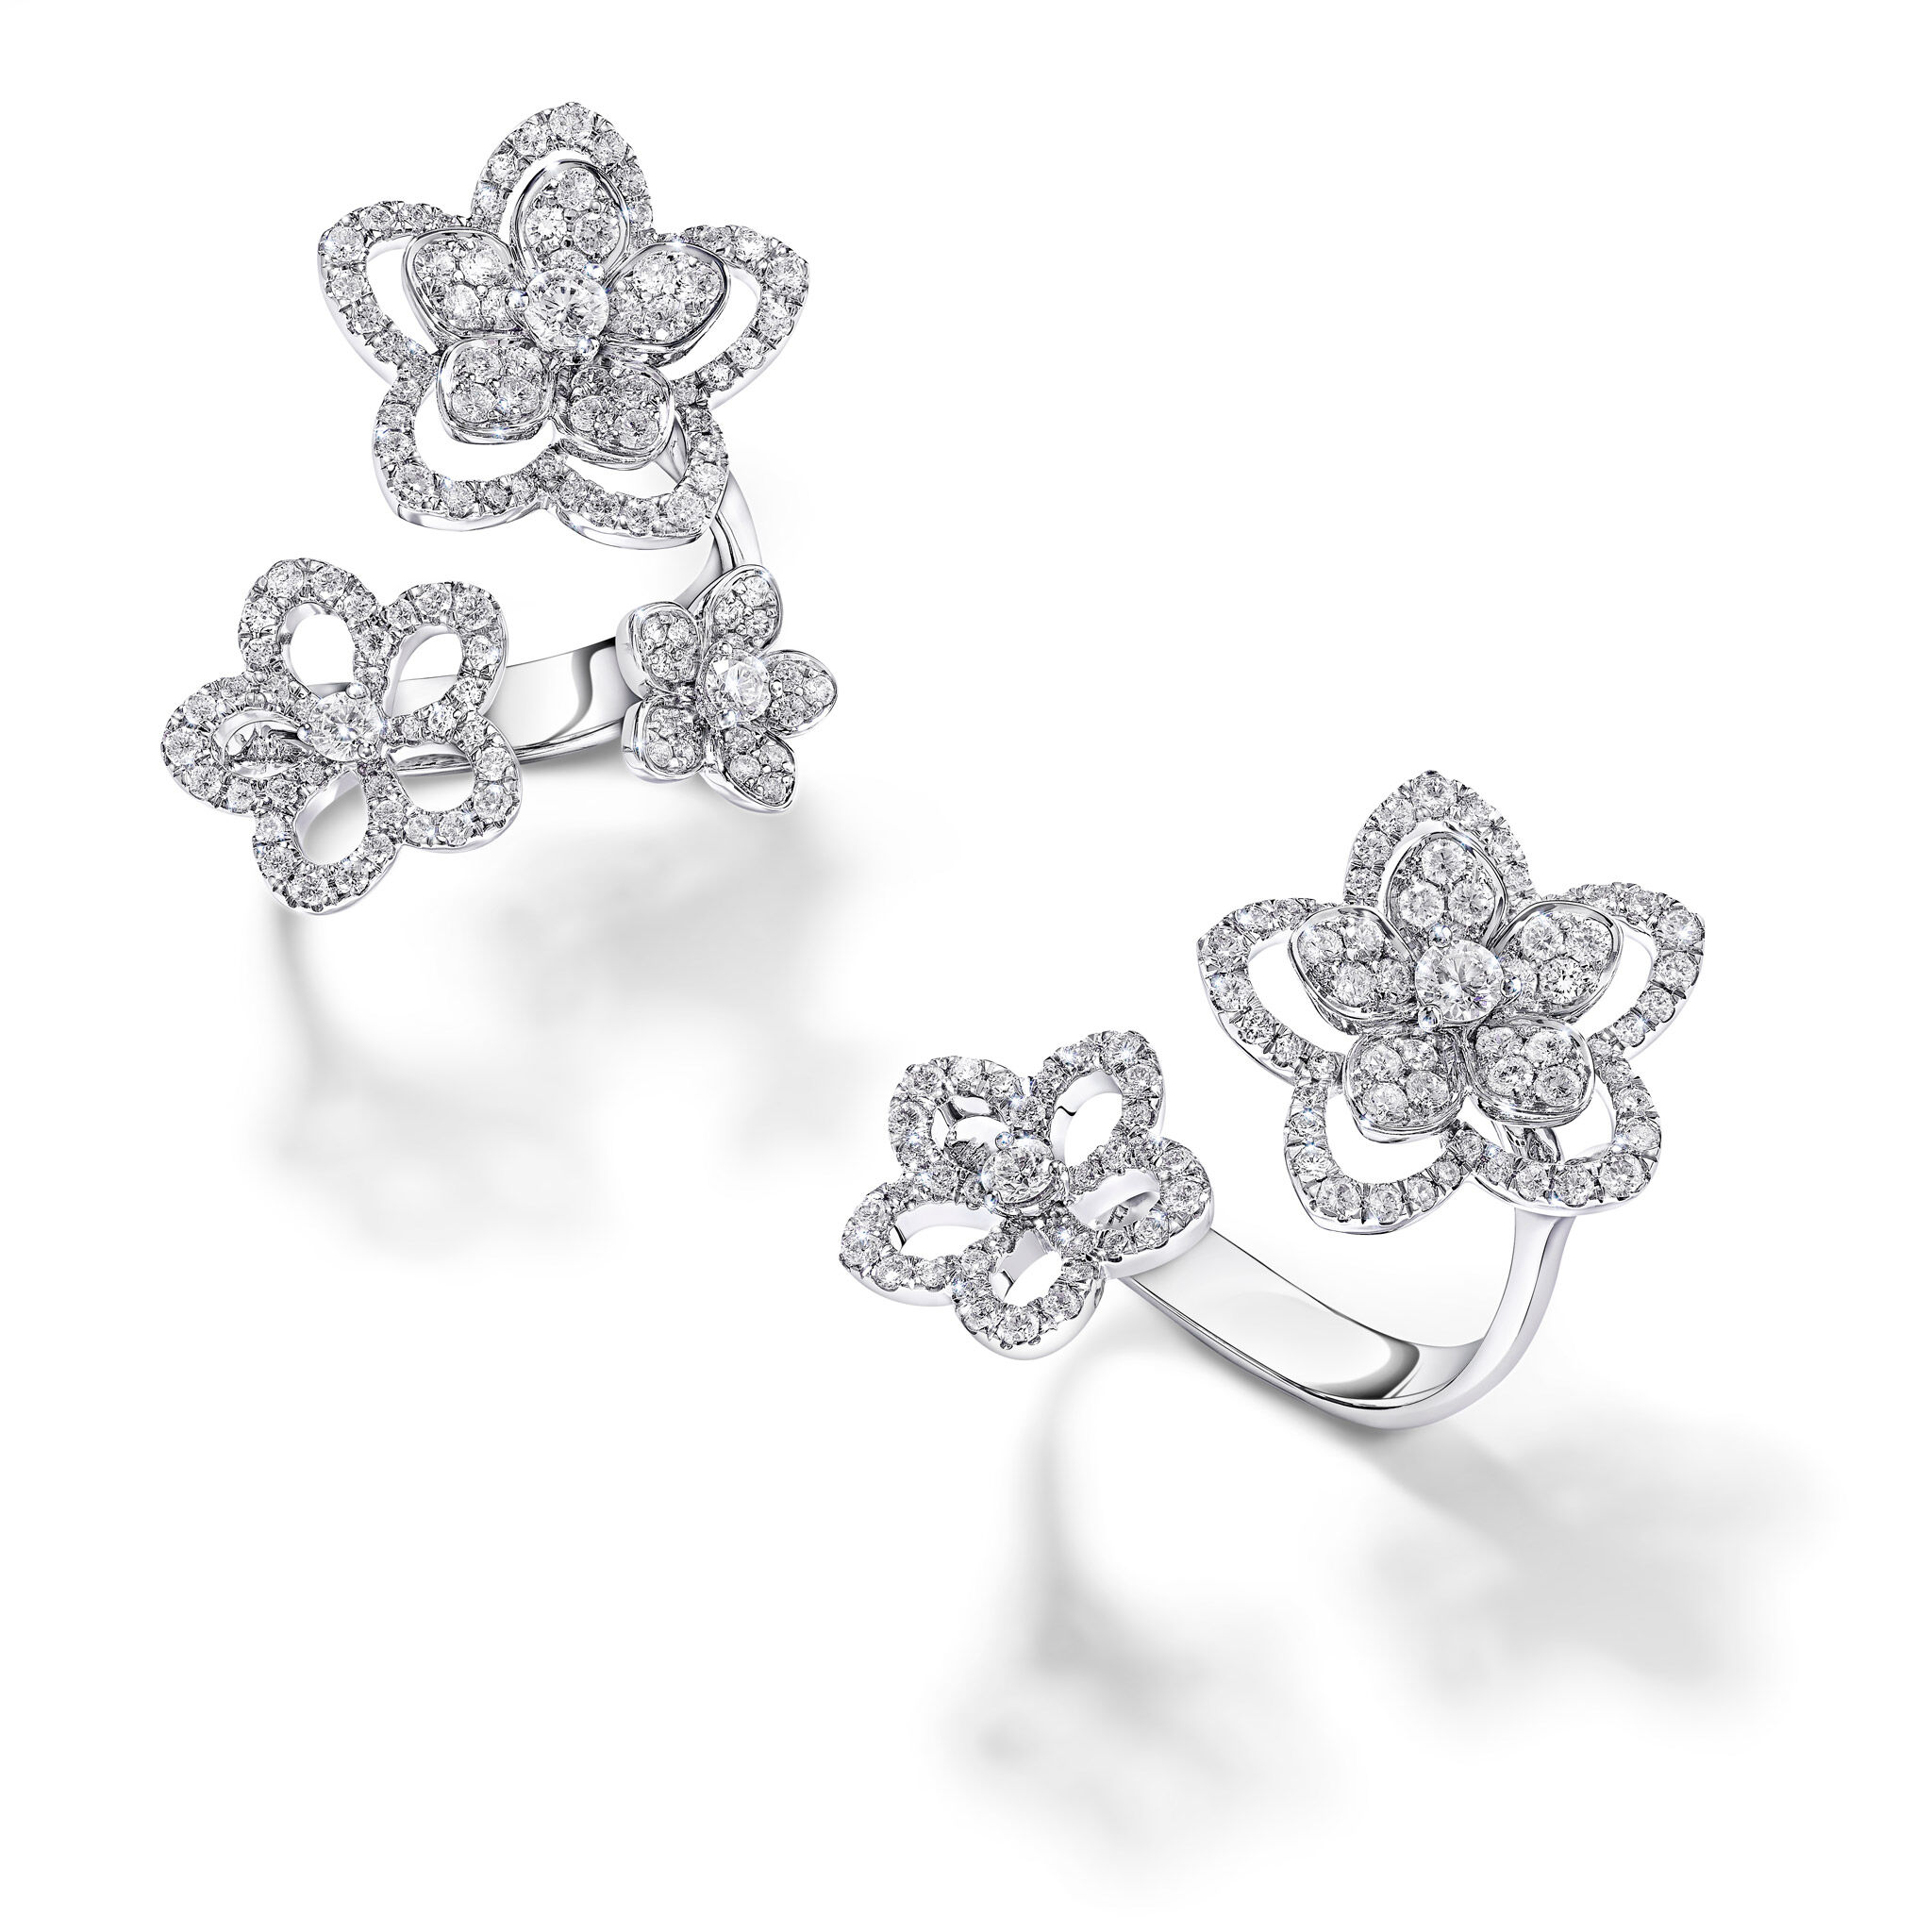 Two Graff Wild Flower collection diamond rings